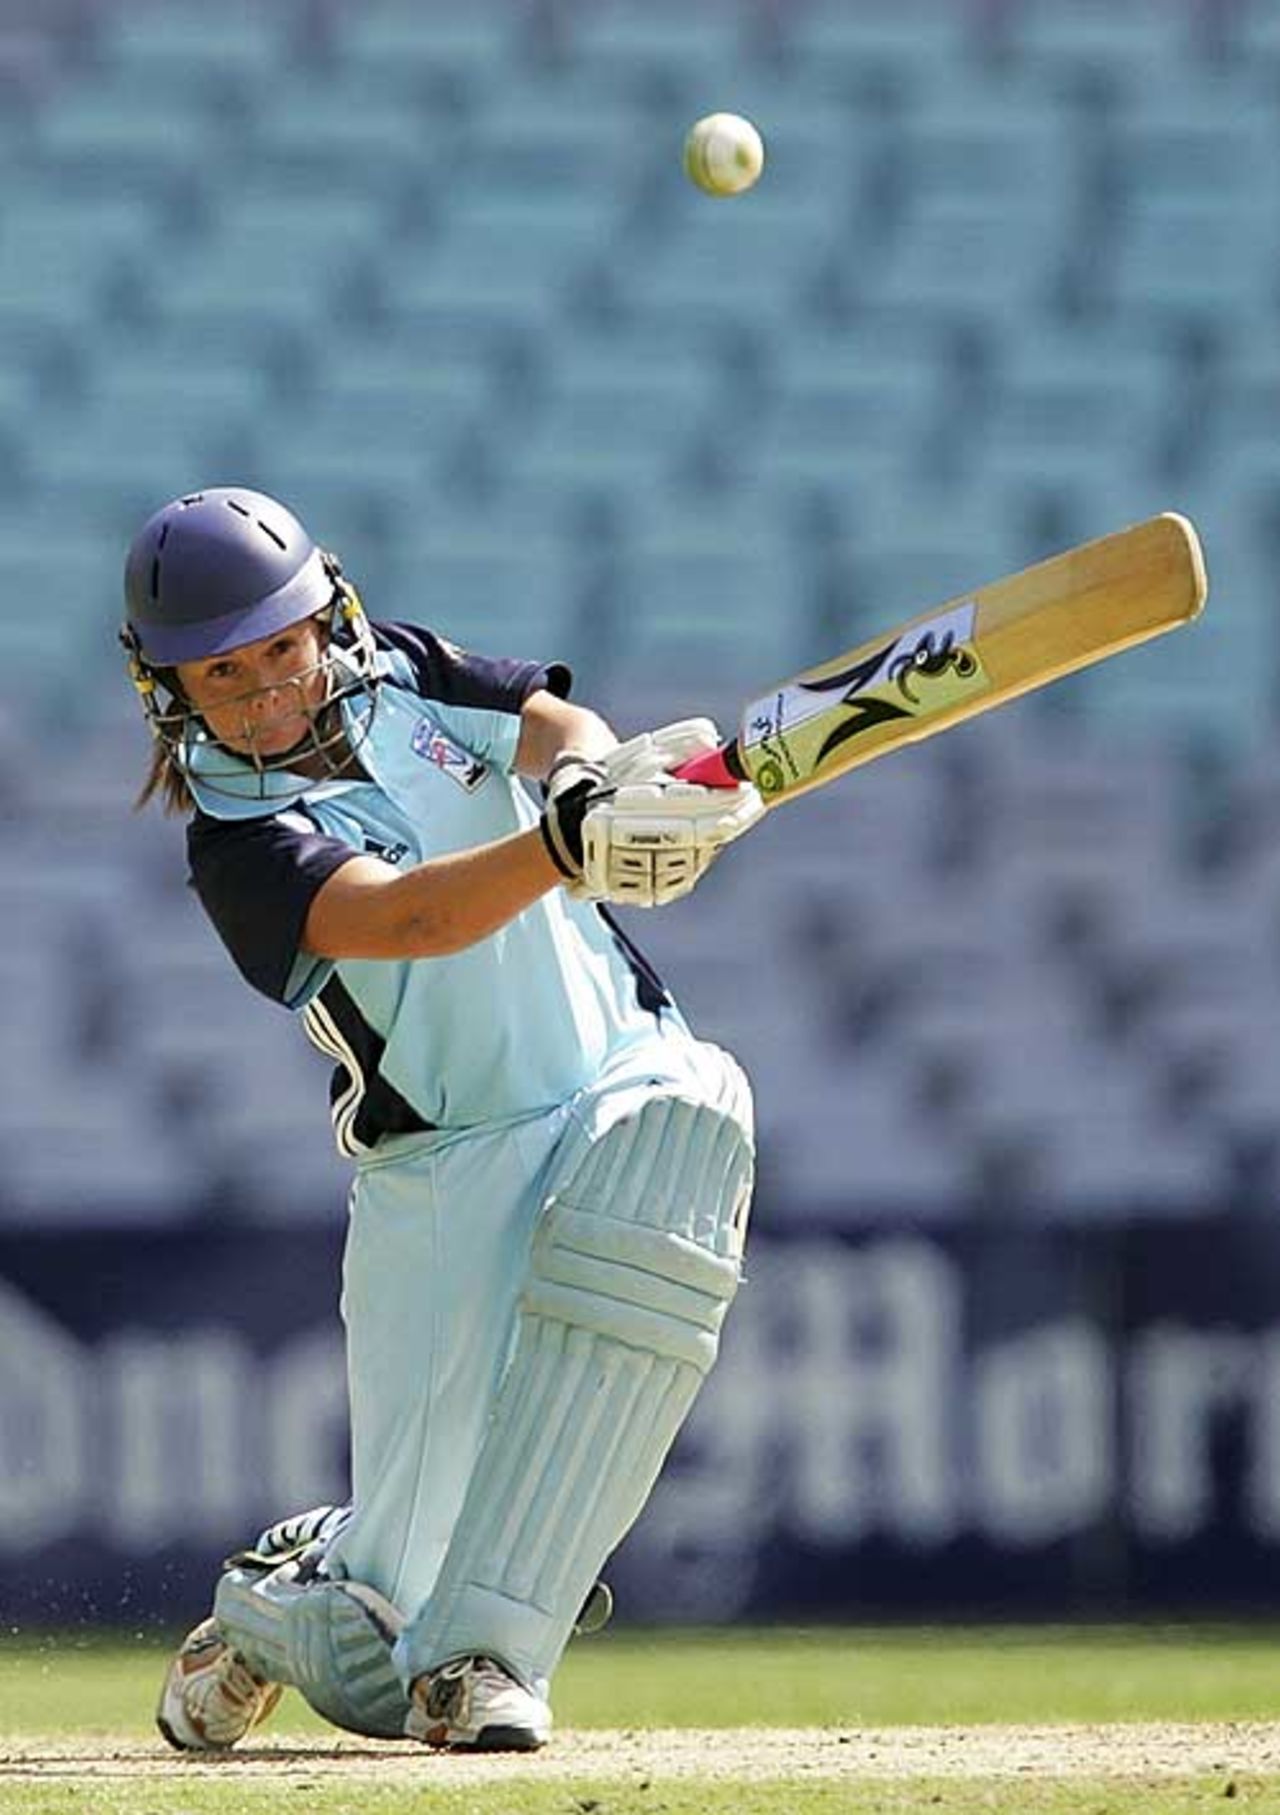 Corinne Hall gives the ball a good hit, New South Wales Women v Victoria Women, WNCL, Sydney, January 17, 2009